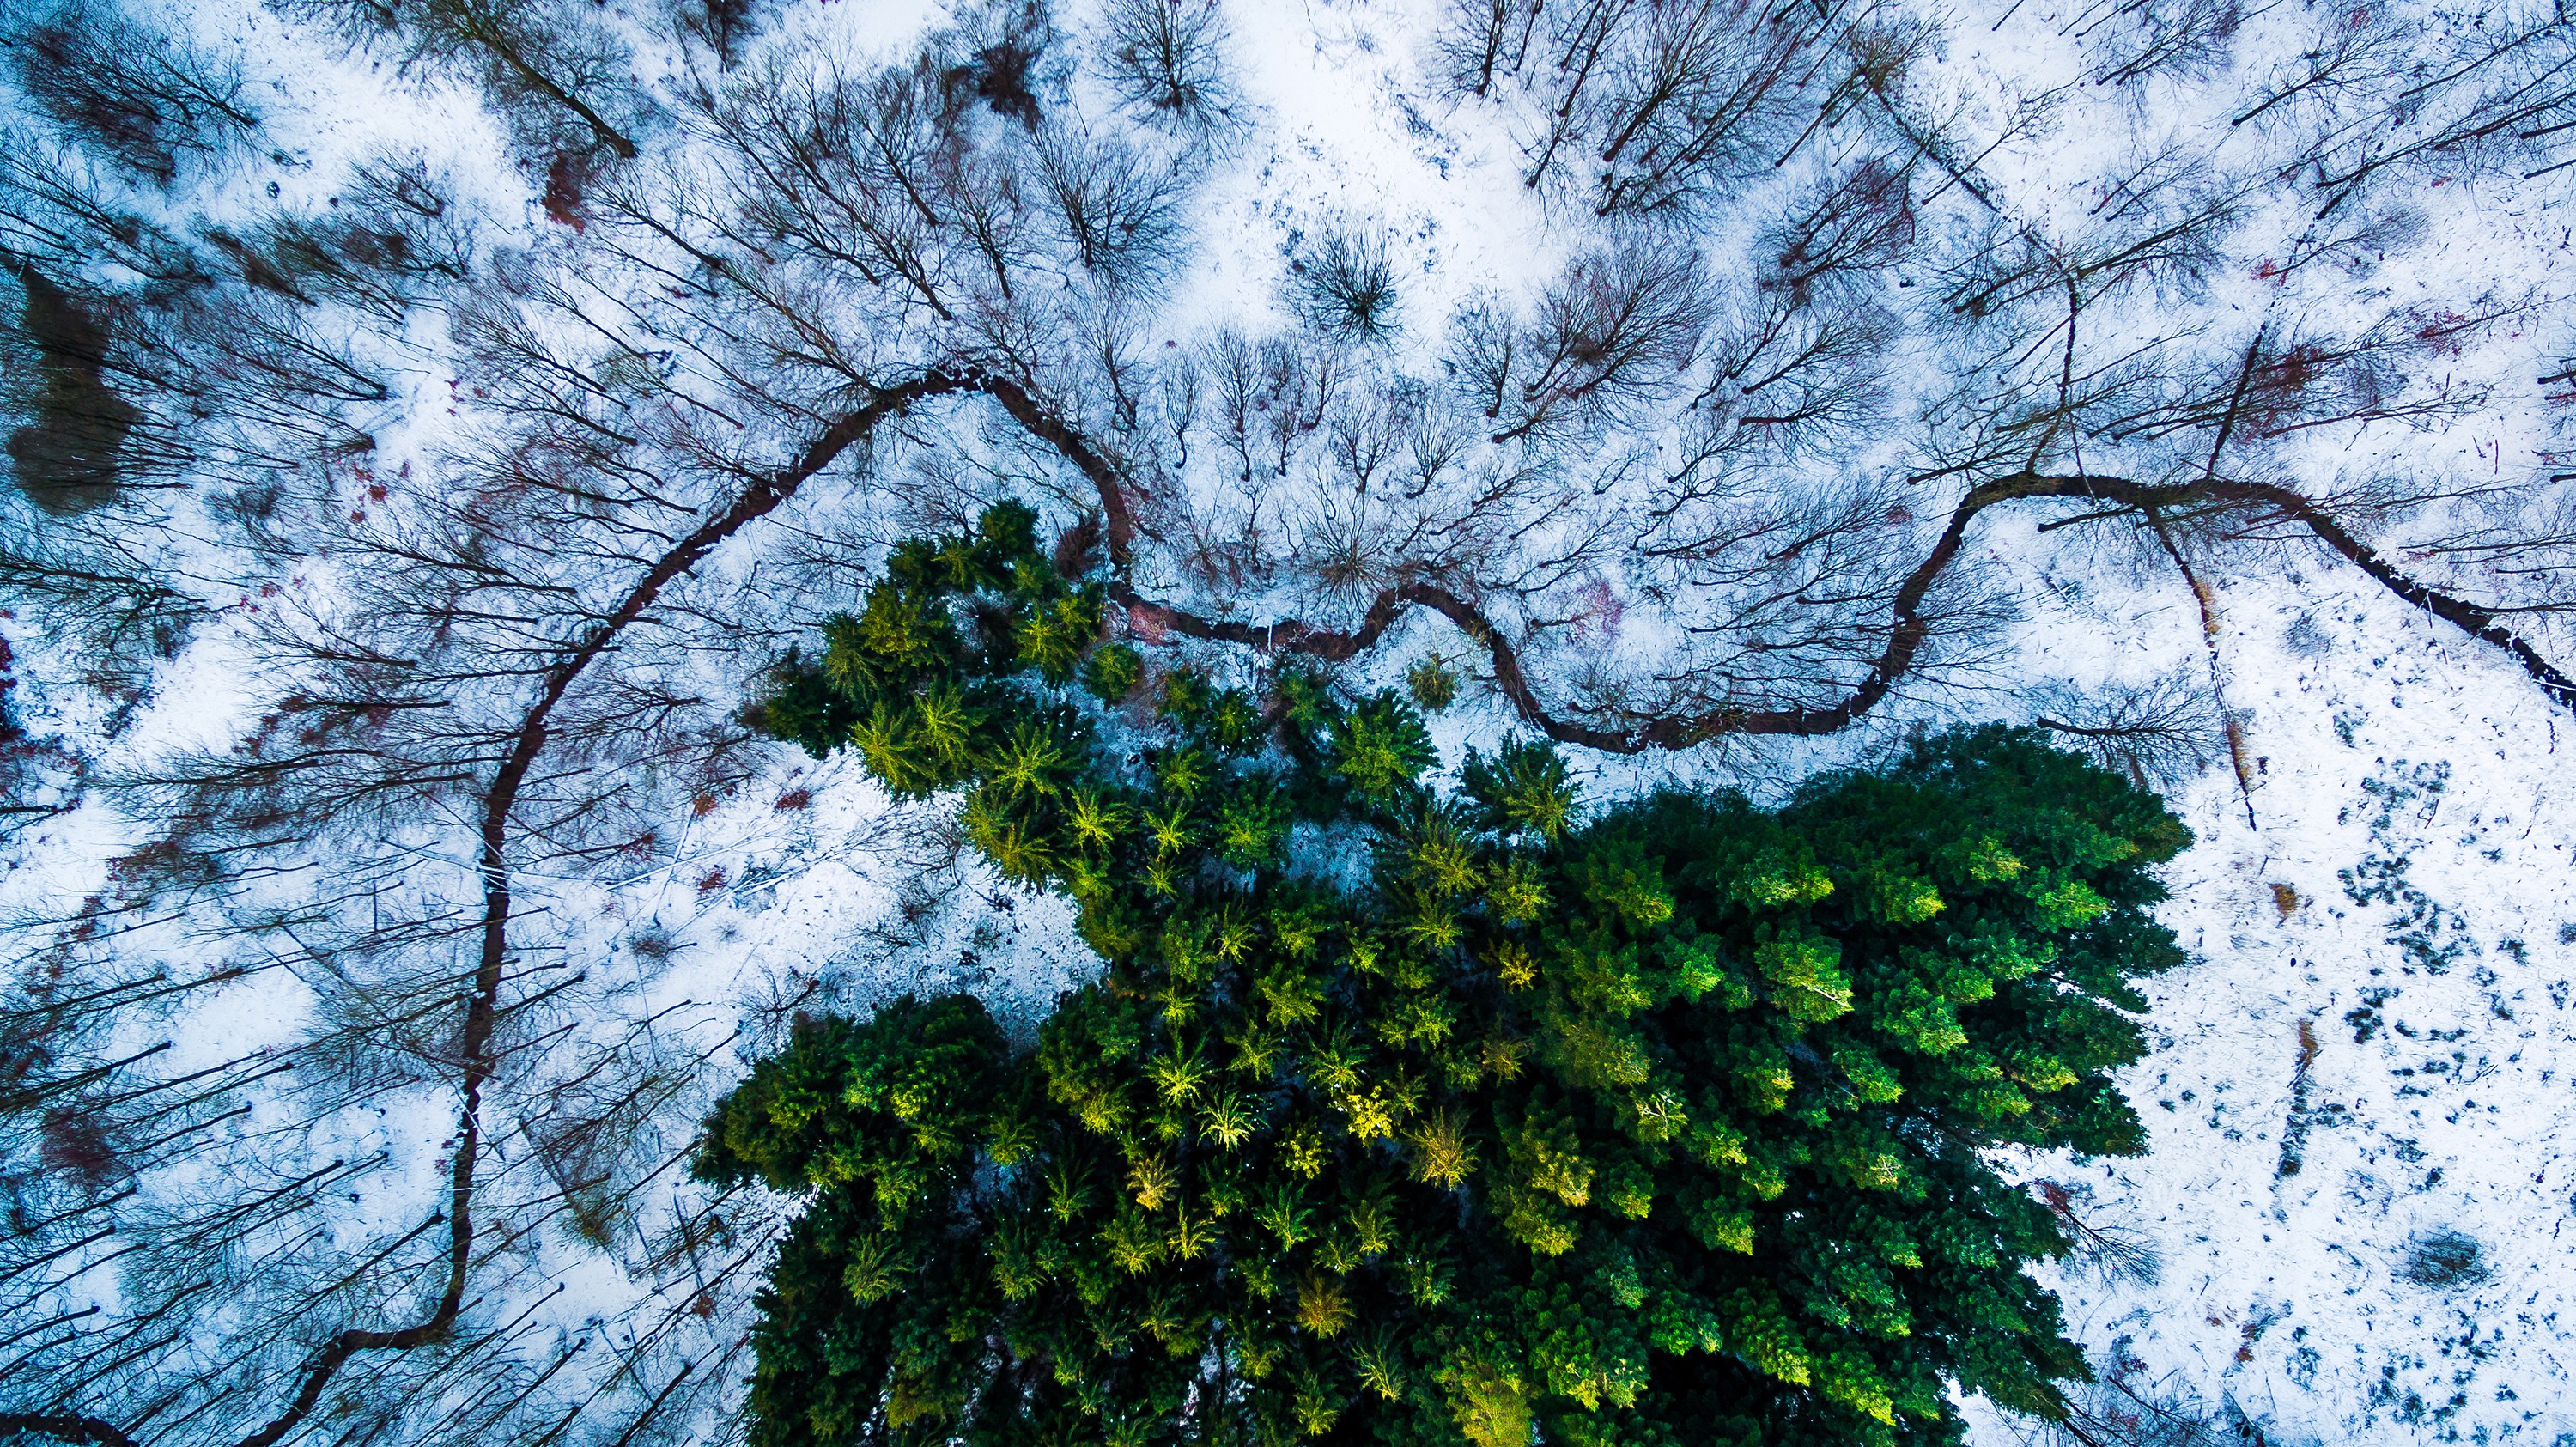 General 3000x1685 drone Denmark snow trees aerial view winter cold outdoors creeks